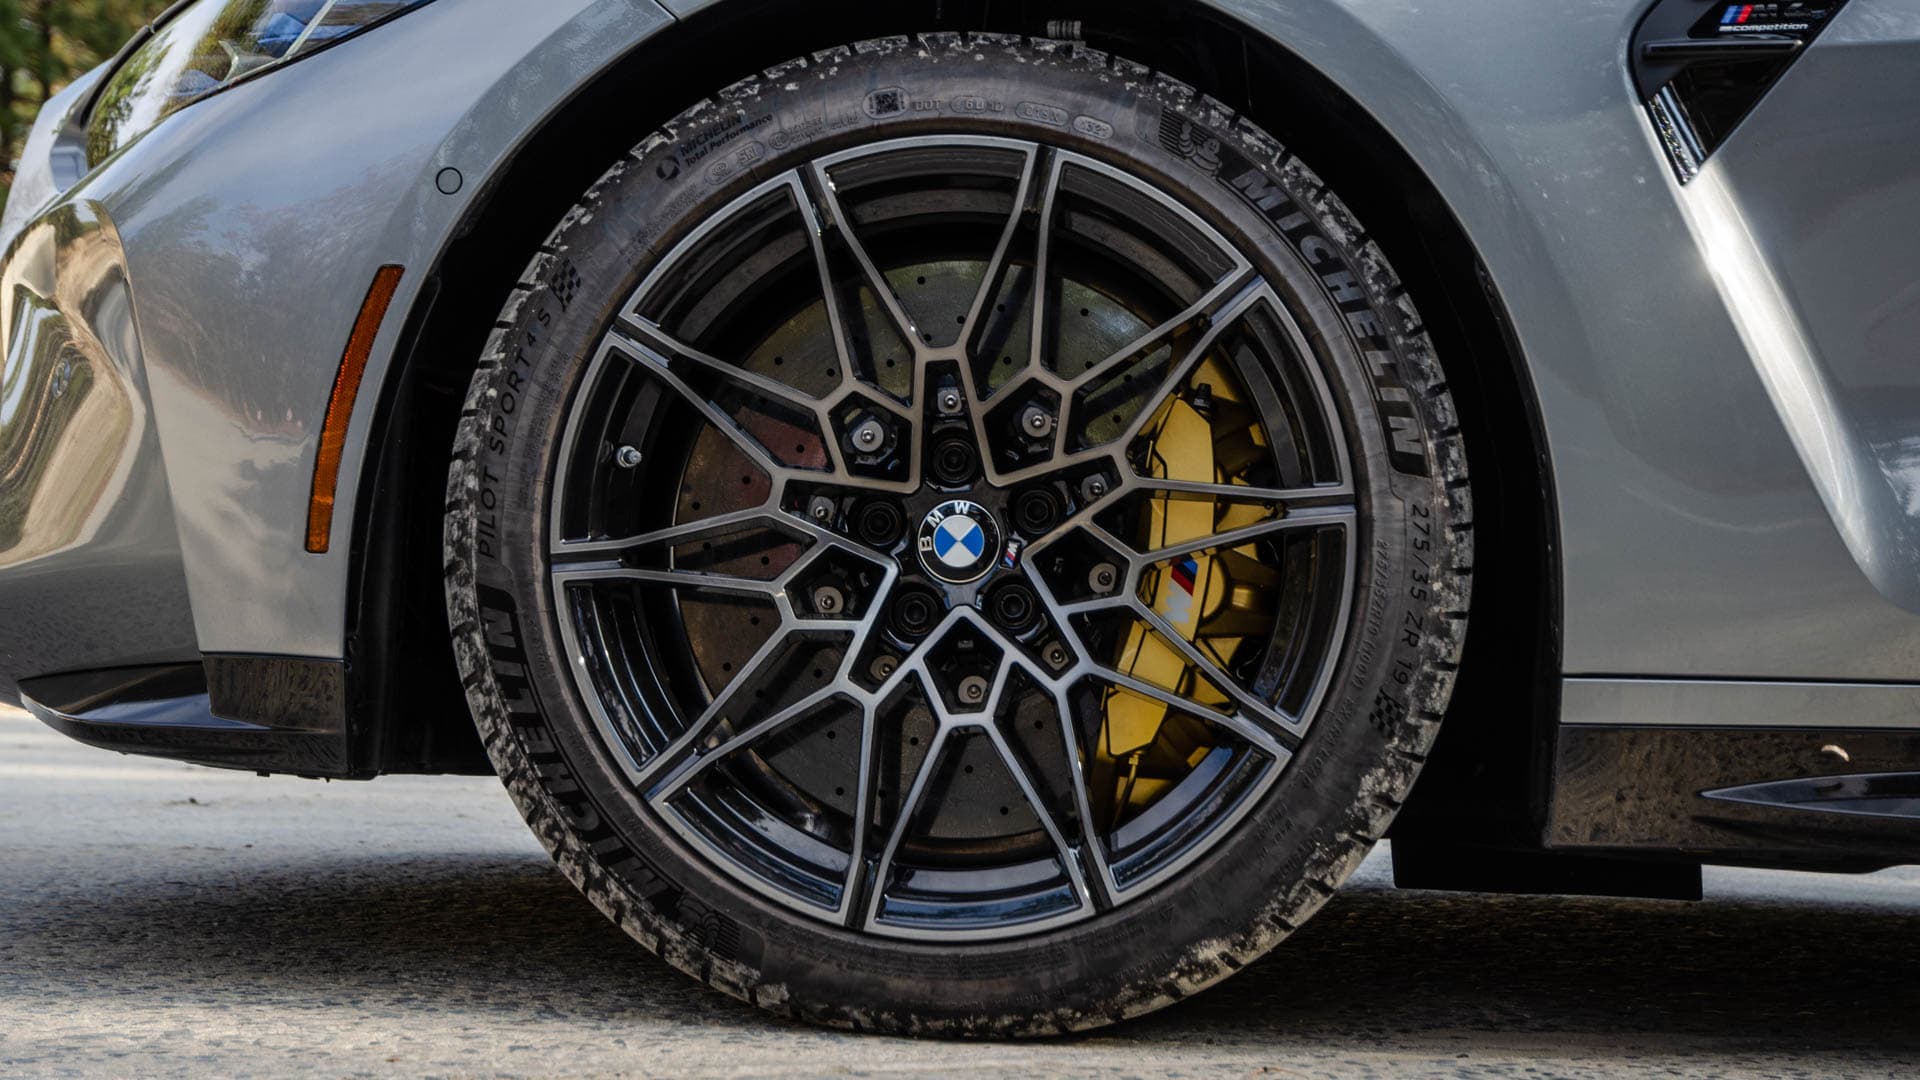 The Michelin Pilot Sport S 5 Could Be BMW's Next-Generation Performance Tire